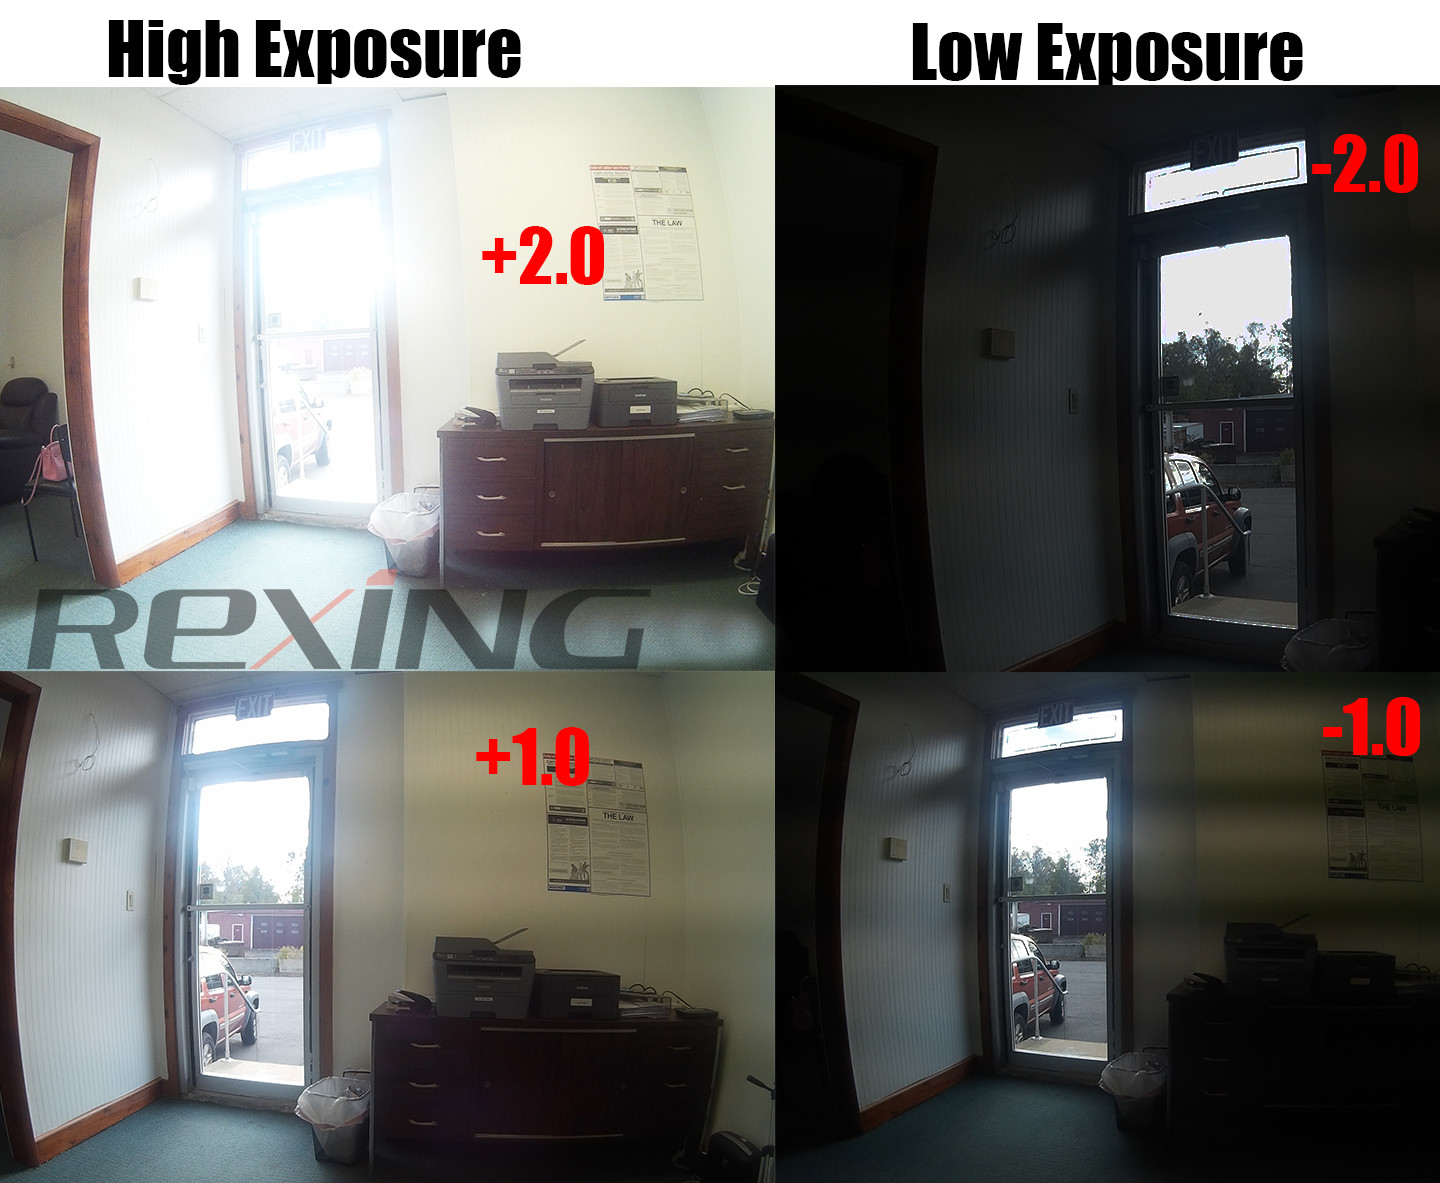 How Exposure Works On The V1